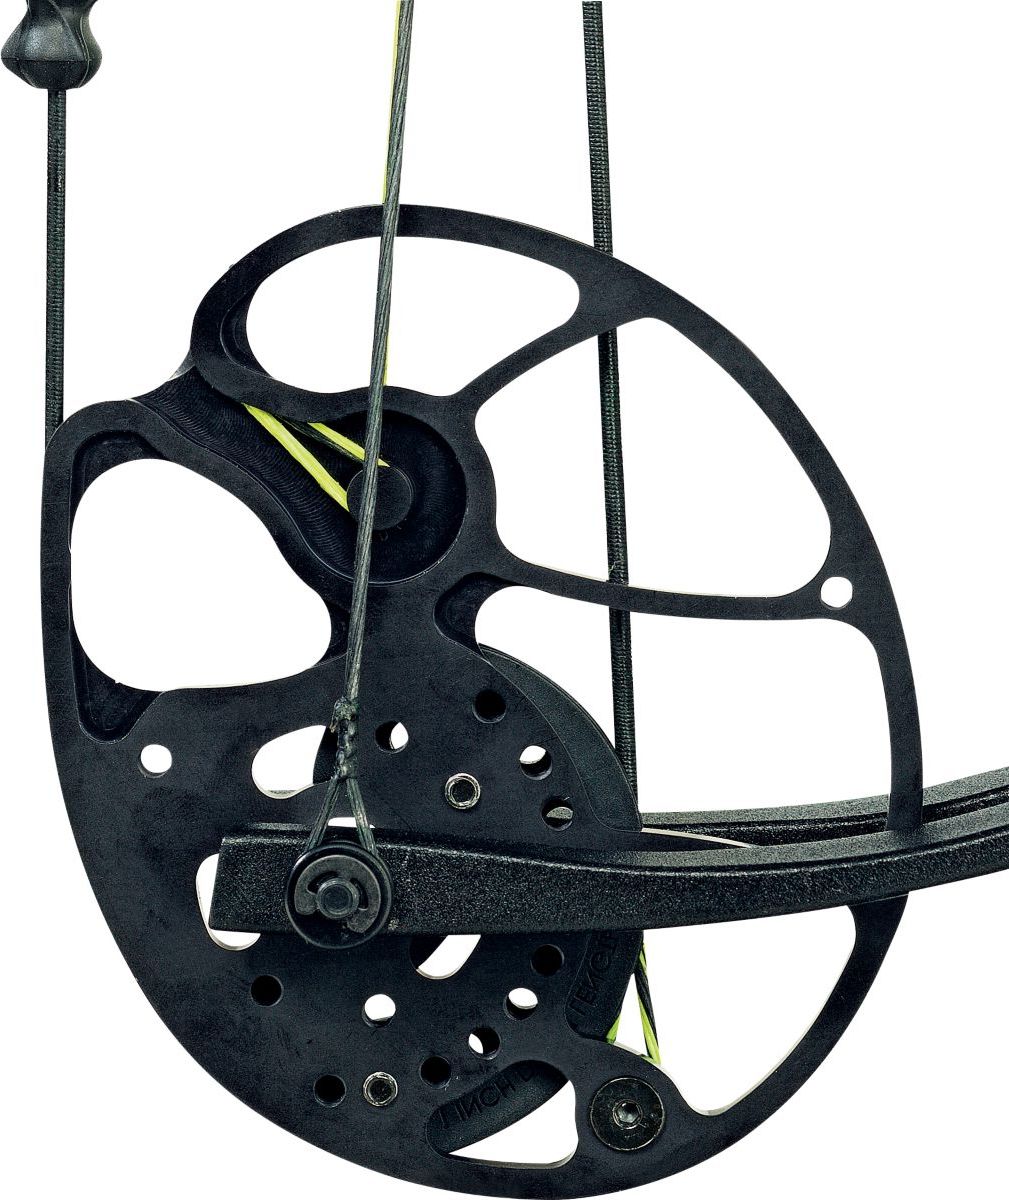 Bear® Archery Cruzer Lite RTH Compound-Bow Package –Yellow